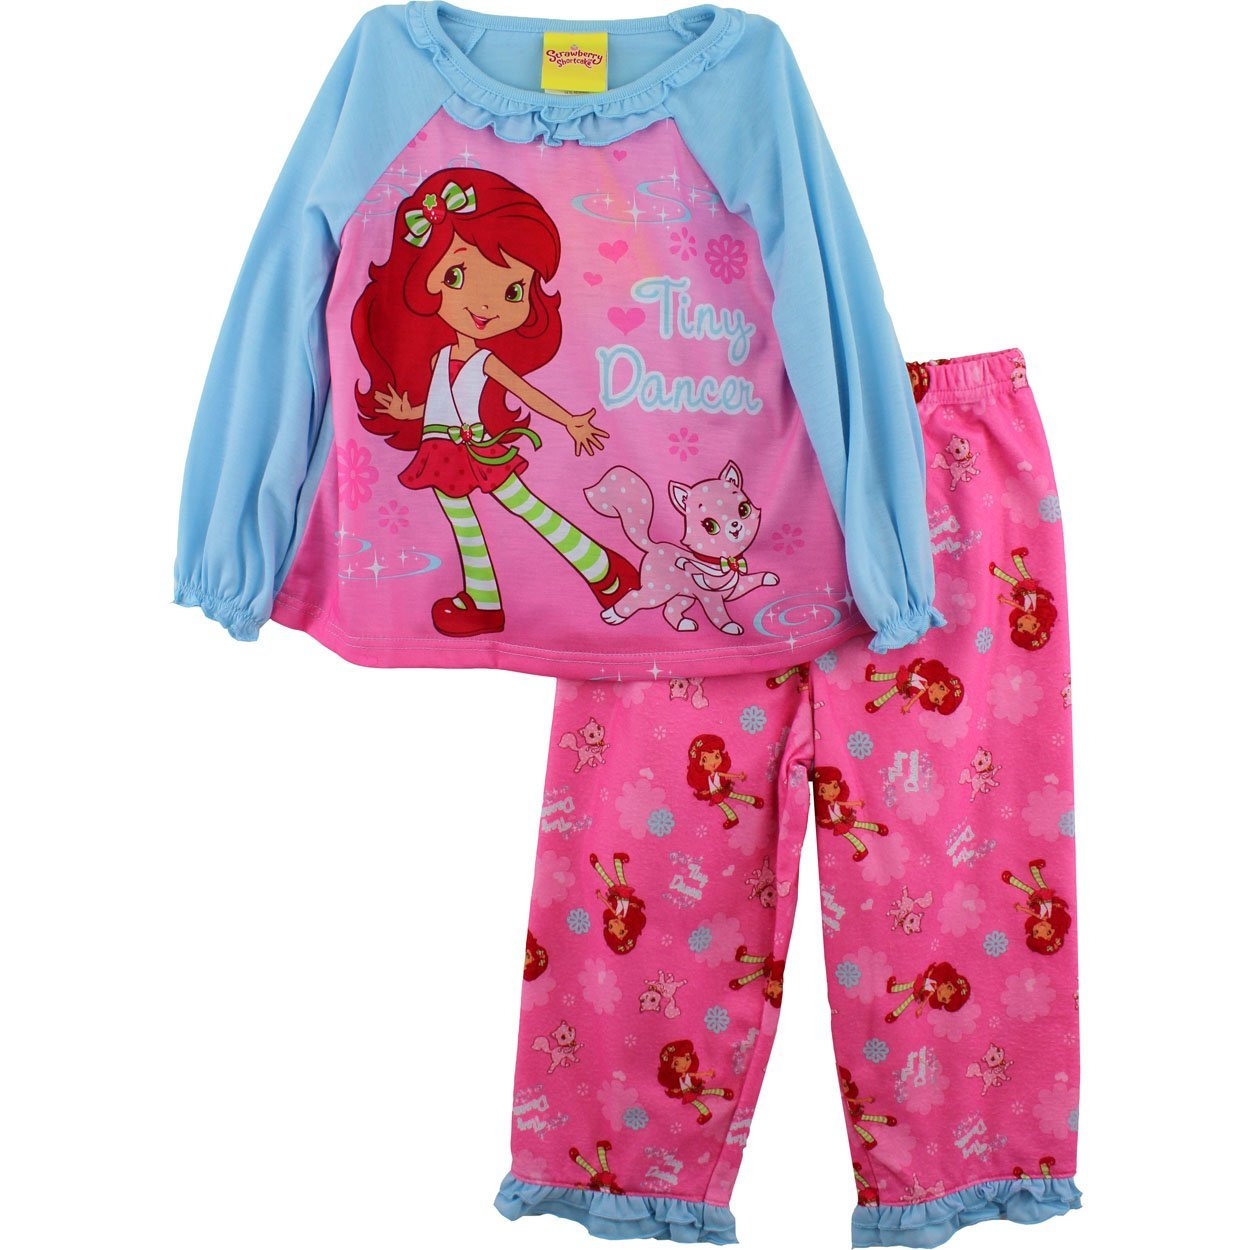 Putting on pajamas clipart free images 3